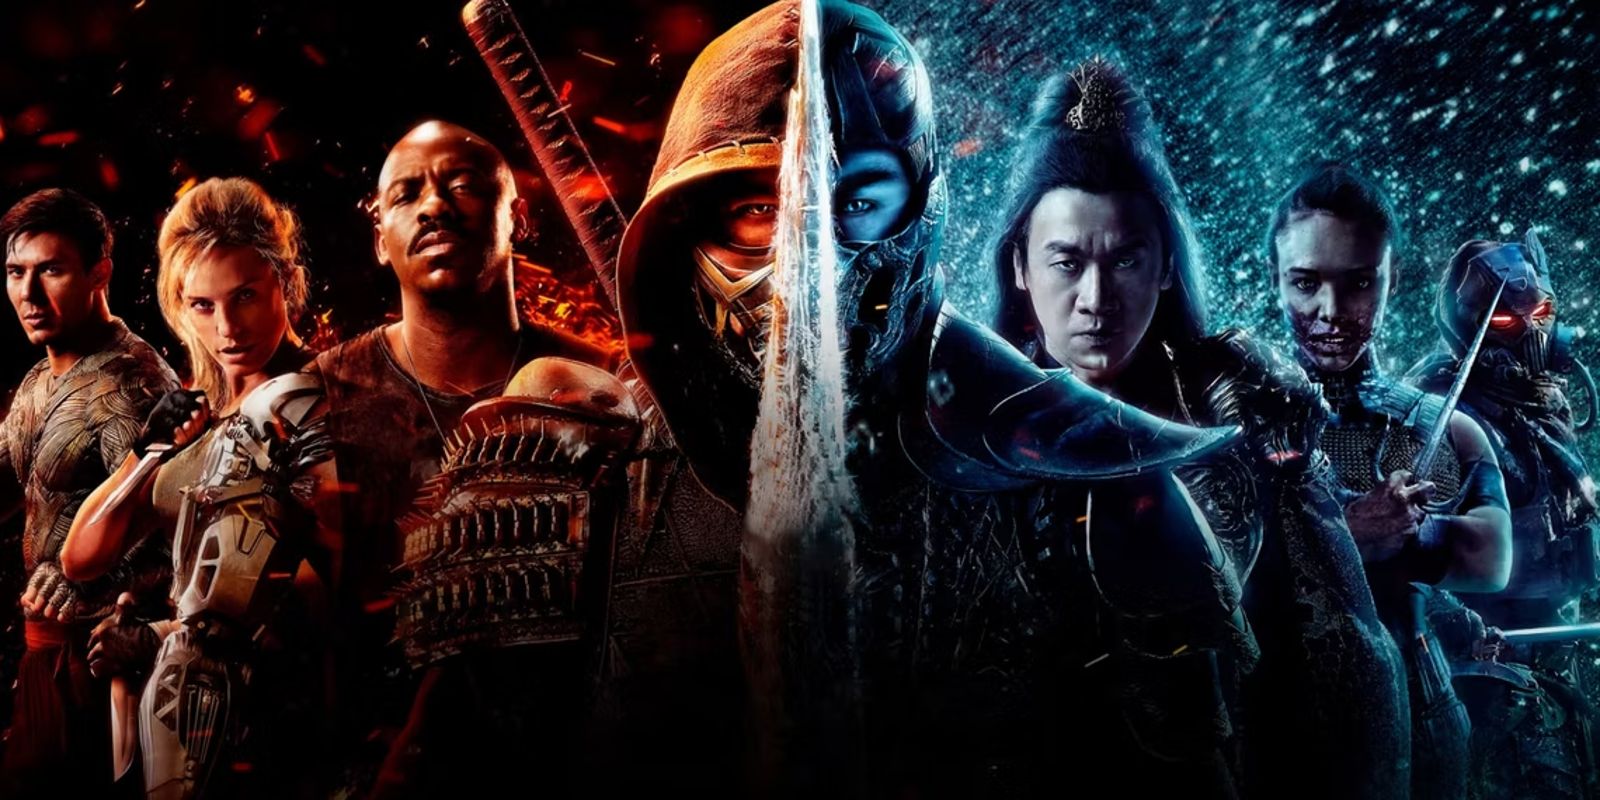 the cast of 2021's mortal kombat feature film standing together in full costume for a promotional poster